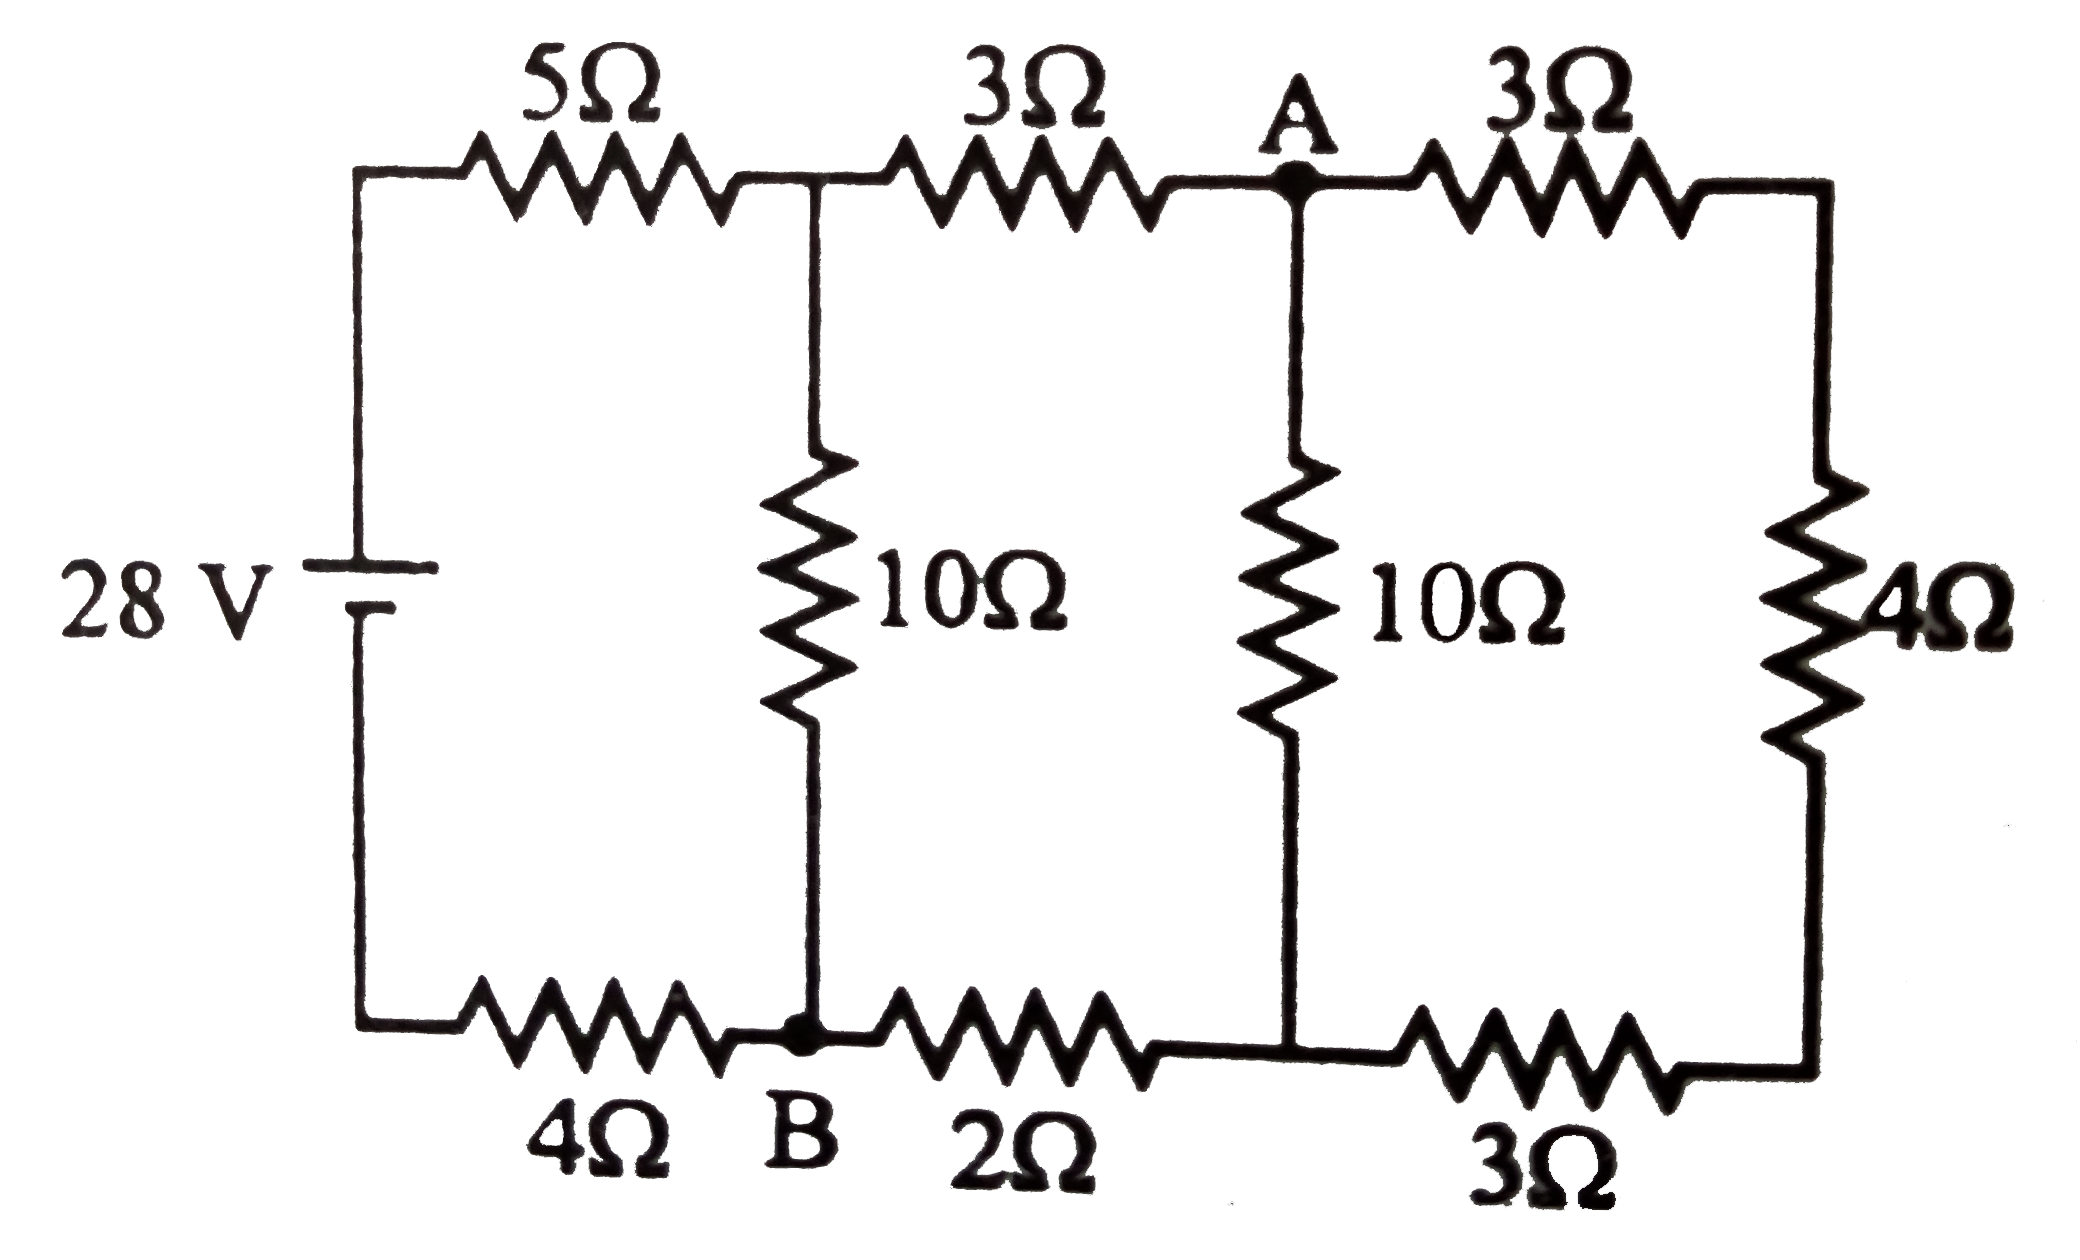 Consider the circuit shown in the figure